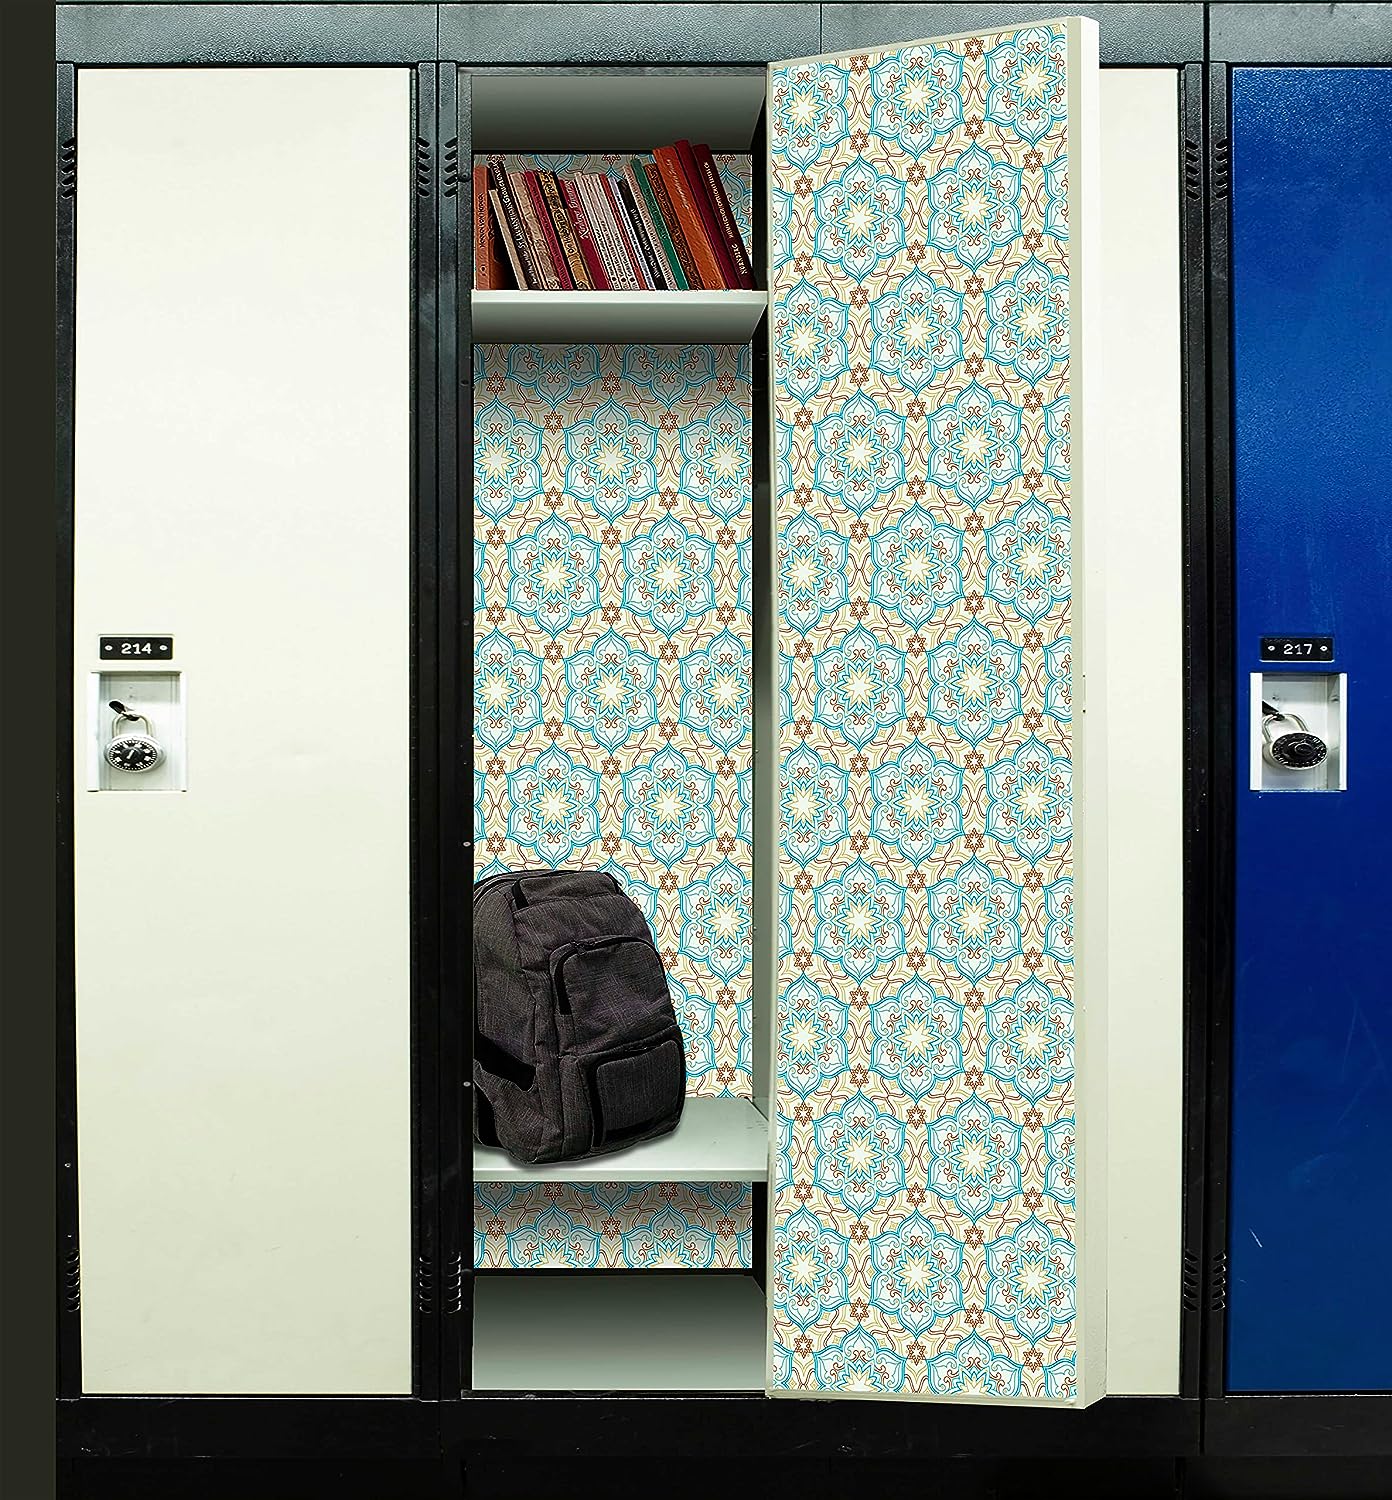 PELICAN INDUSTRIAL Magnetic Locker Wallpaper (Full Sheet Magnetic) - Trimmable, Easy Install, Remove & Reuse - Pack of 3 Sheets - Geometric Pattern (vb048)